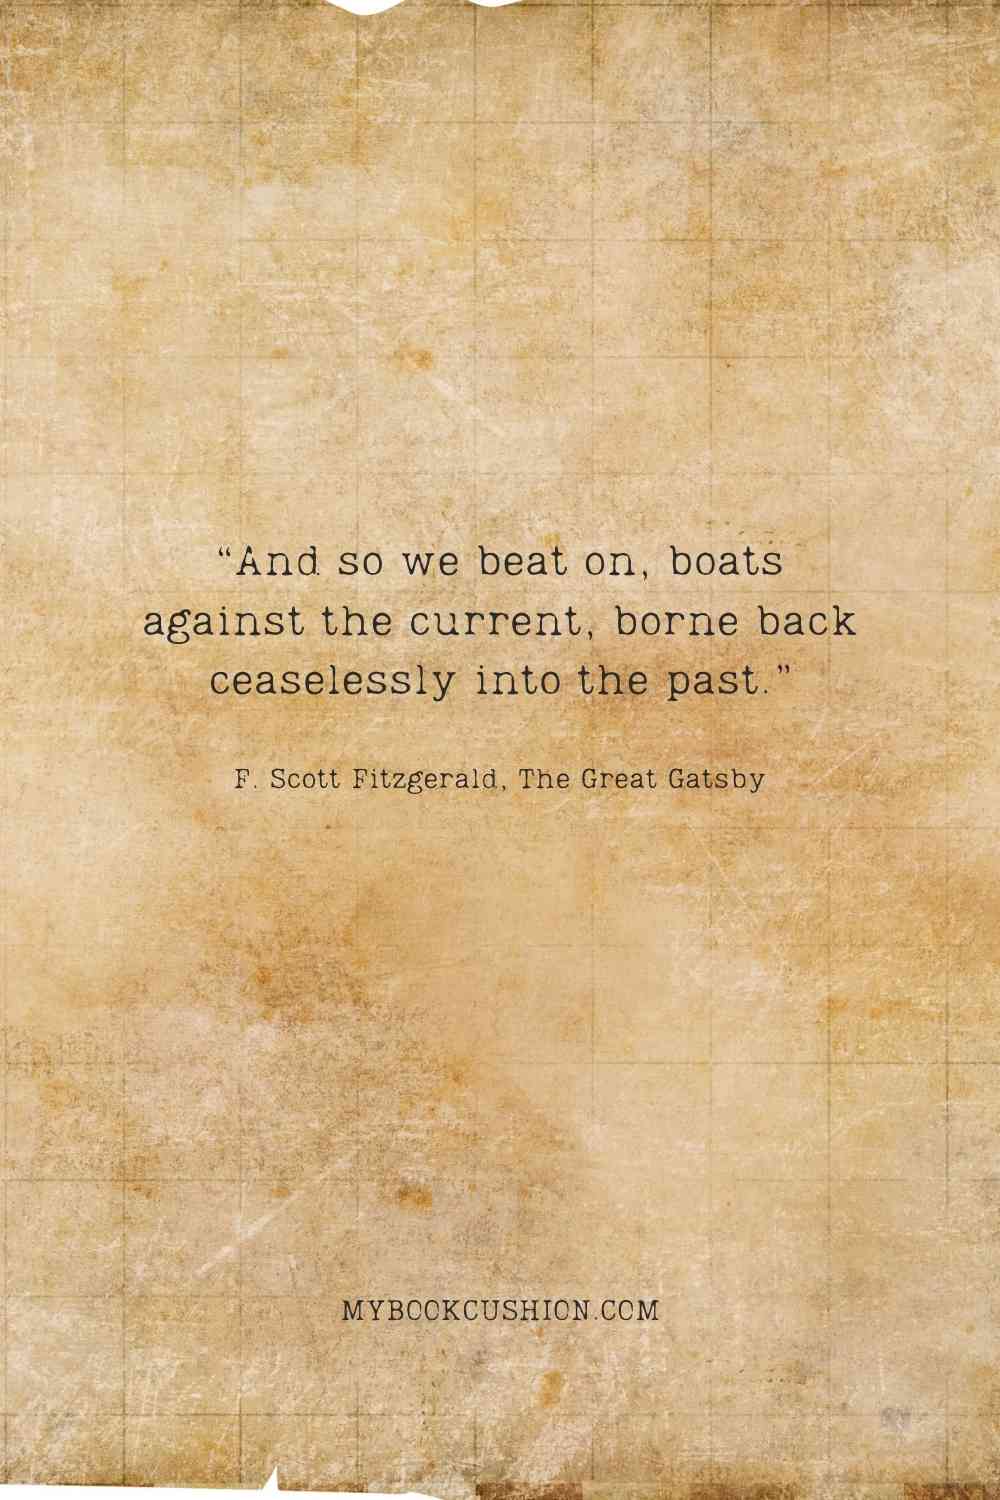 “And so we beat on, boats against the current, borne back ceaselessly into the past.” -F. Scott Fitzgerald, The Great Gatsby